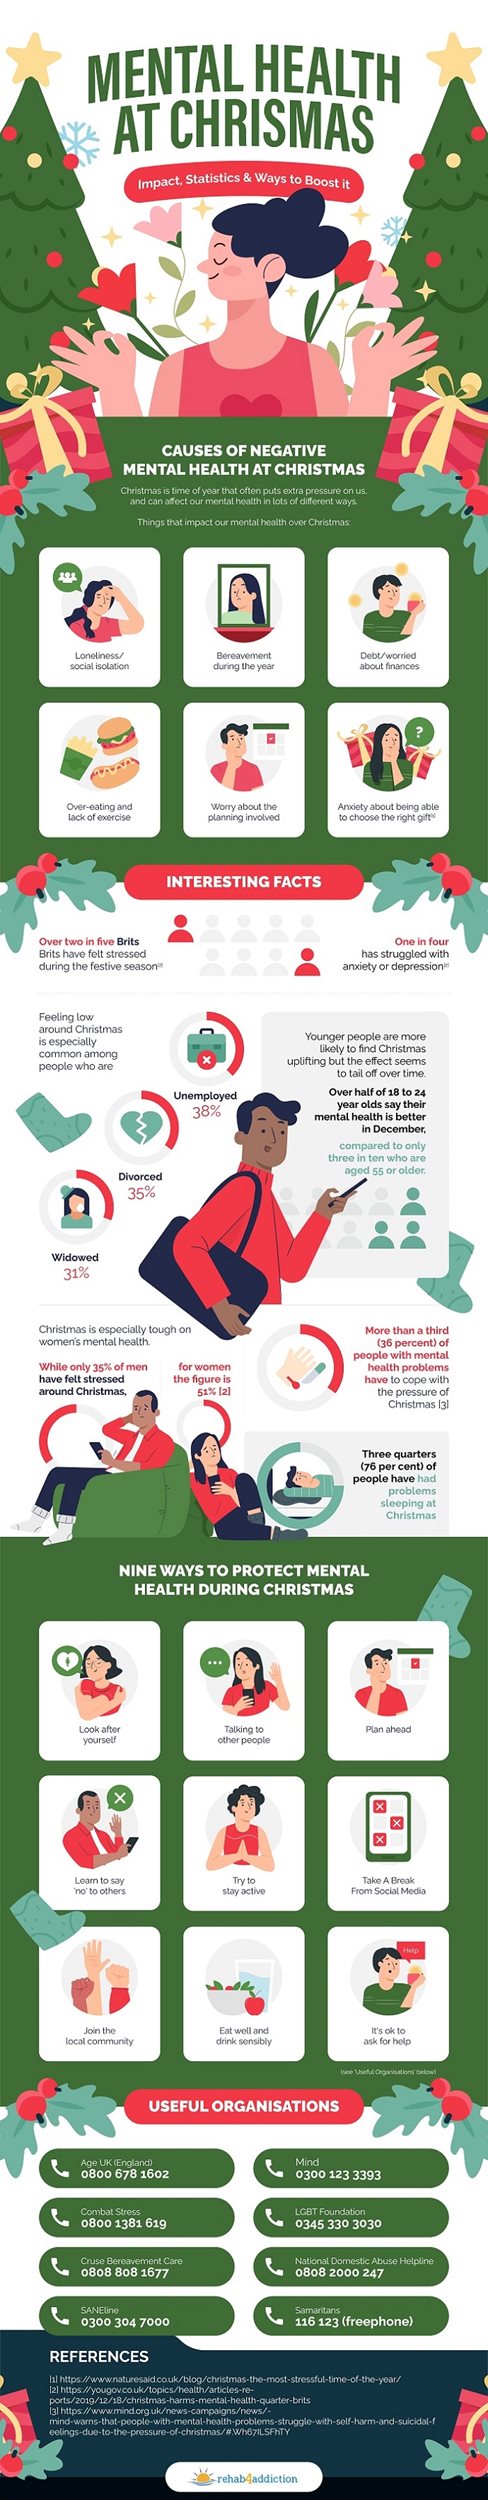 Mental Health at Christmas Infographic